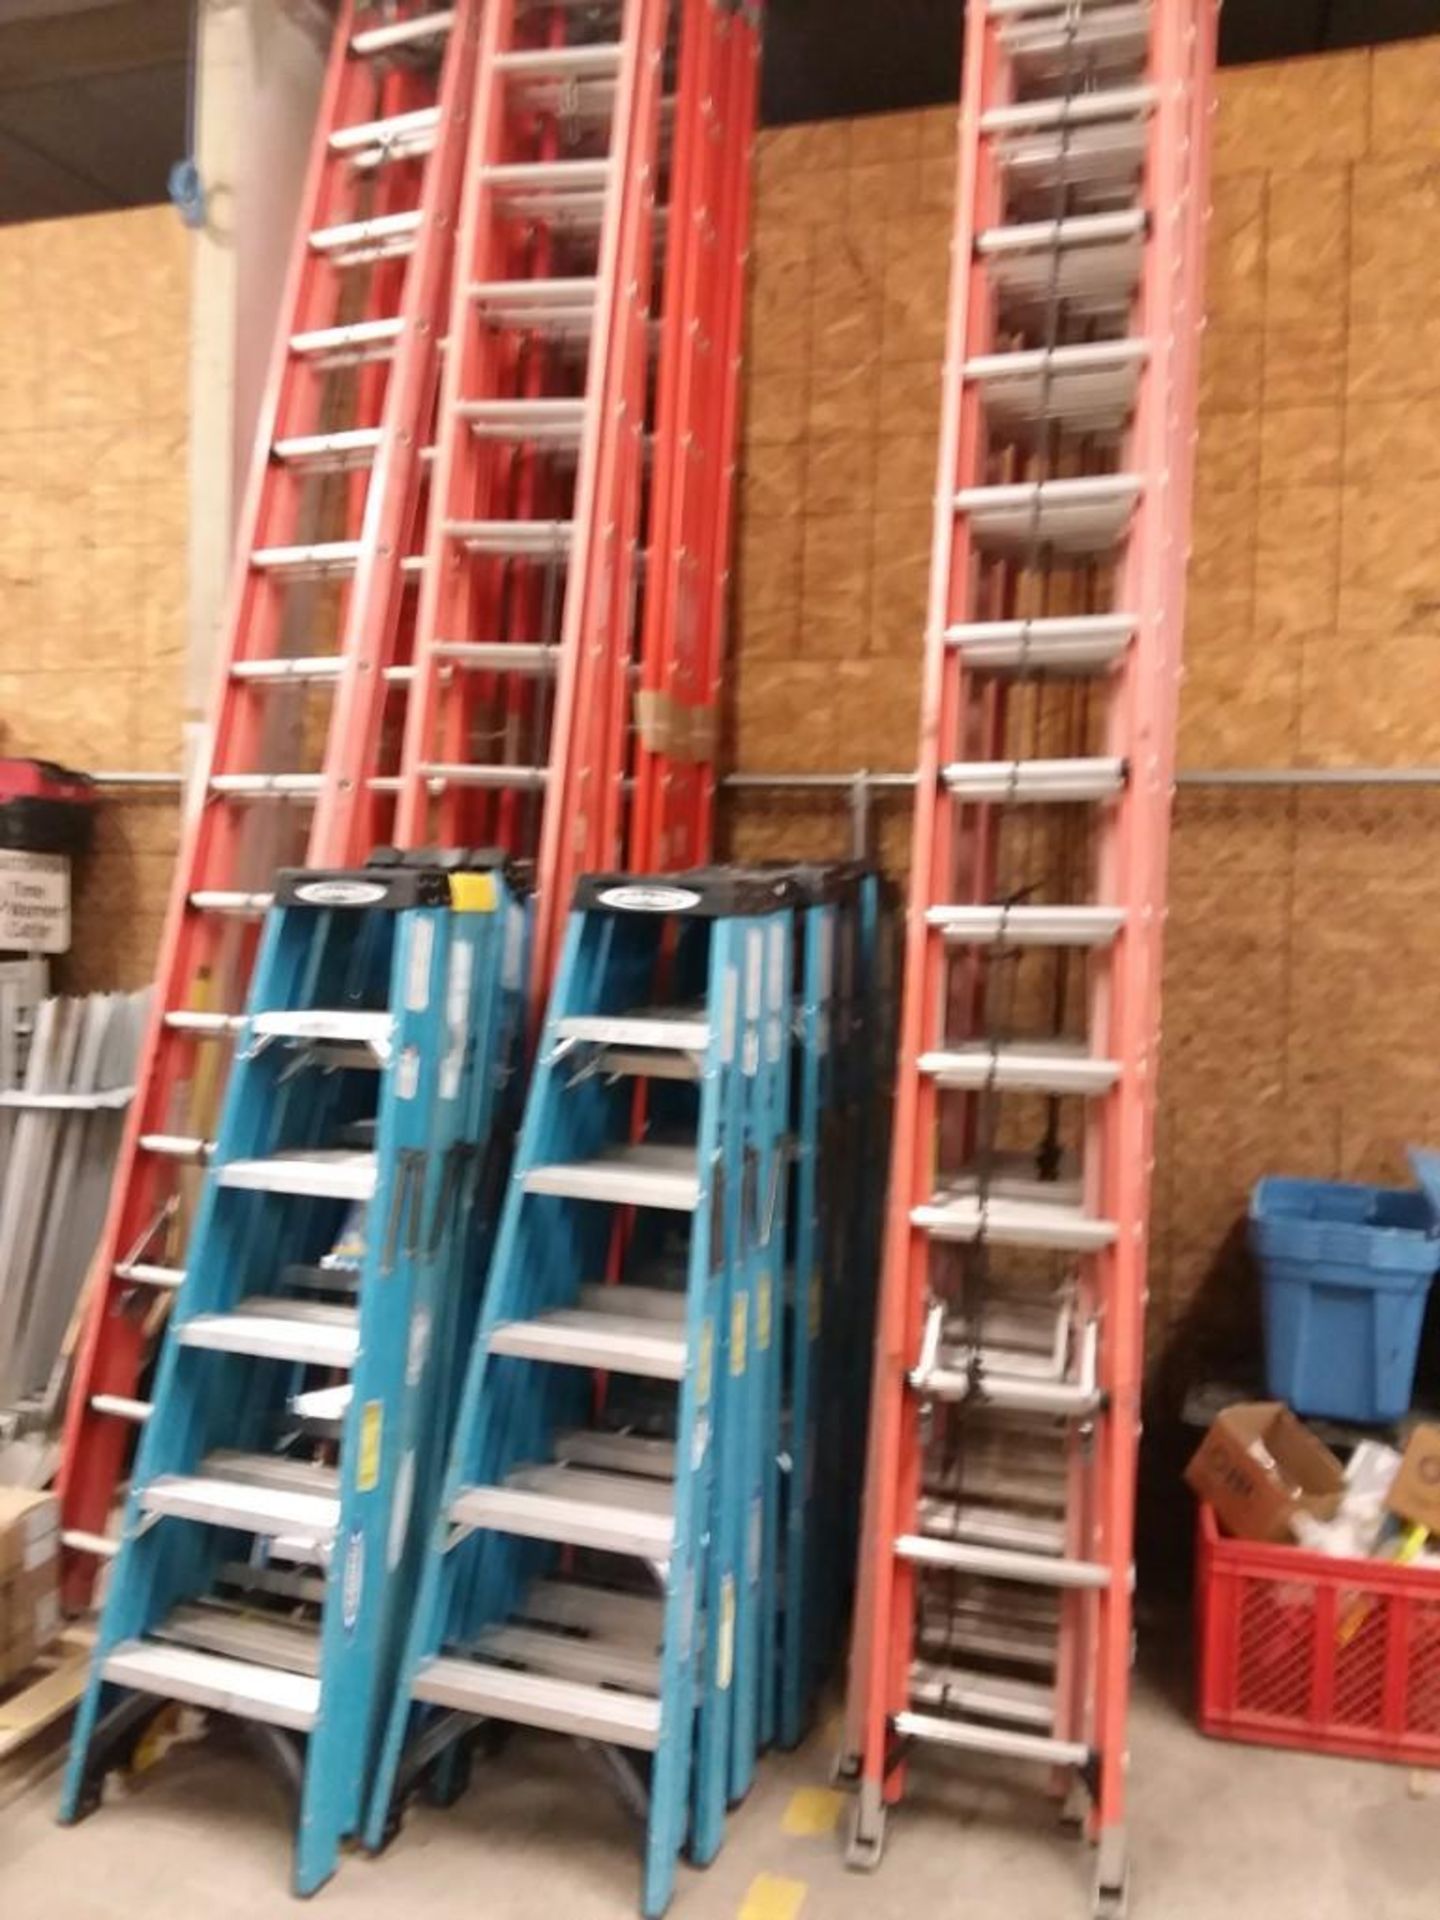 13 6' LADDERS (4 NEW 9 USED)